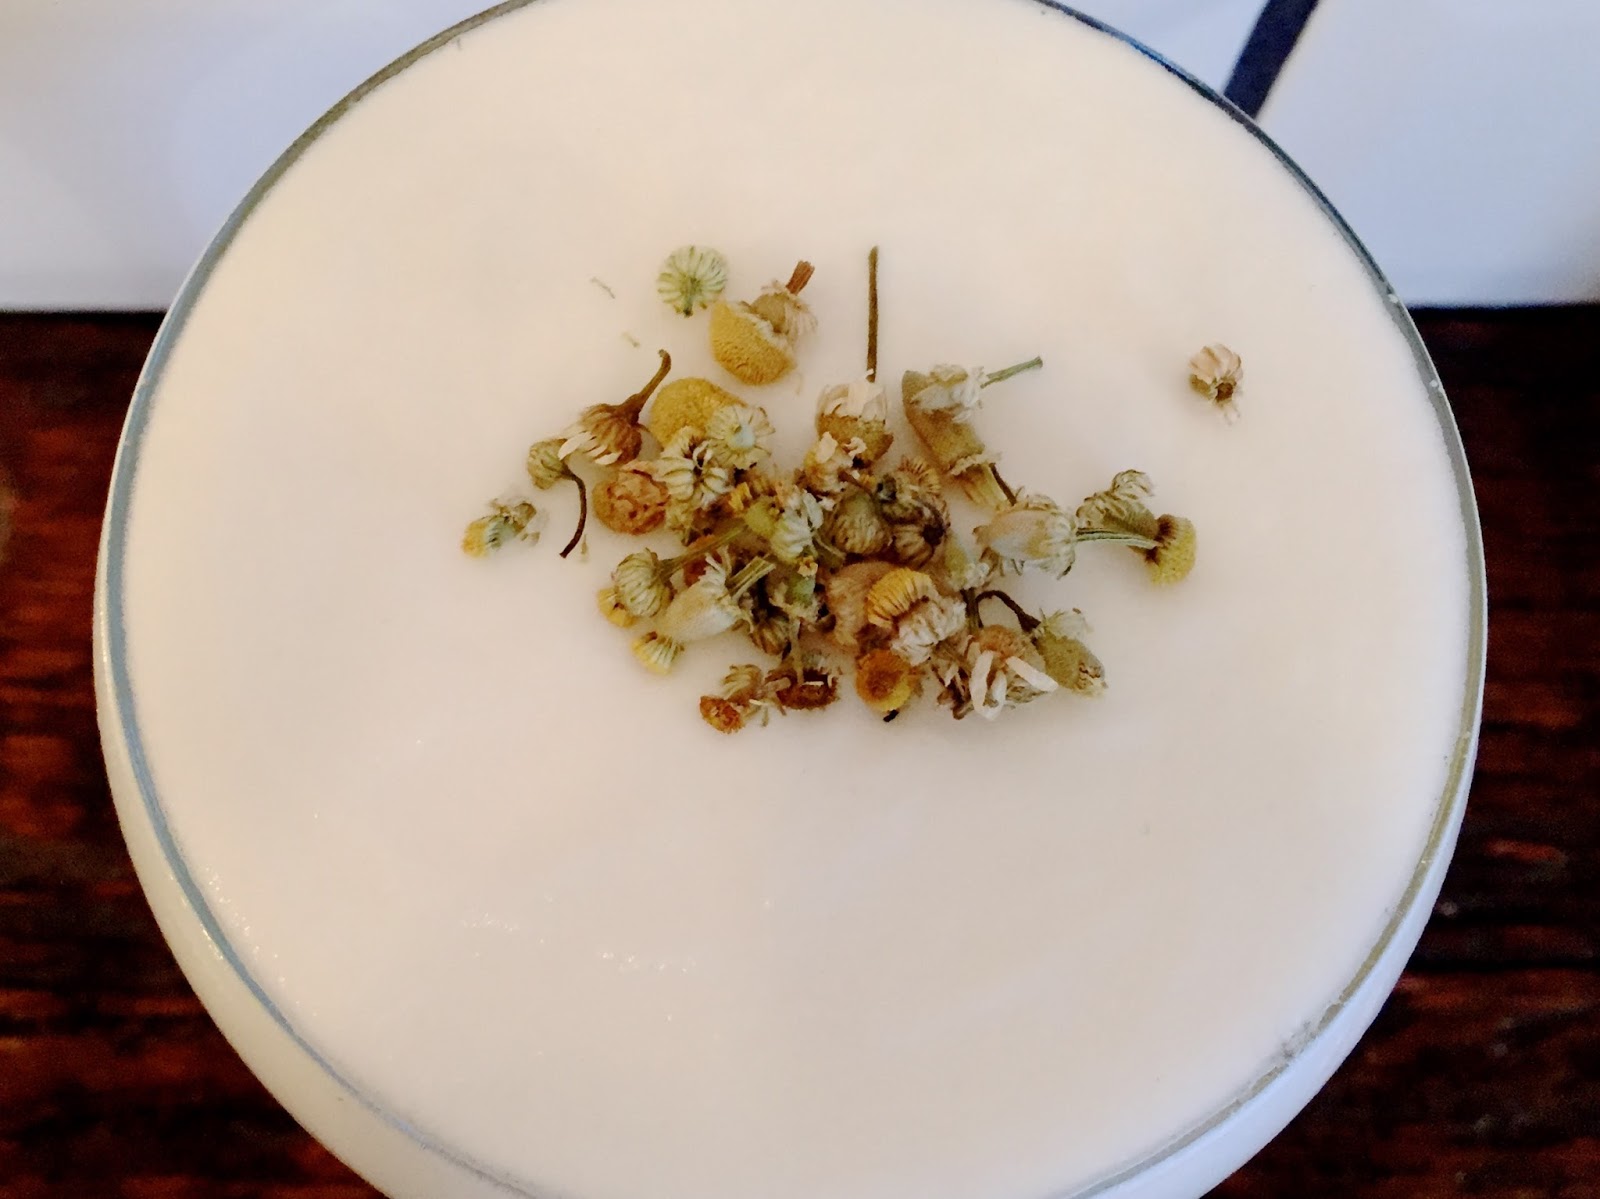 cocktail with dried flowers garnish